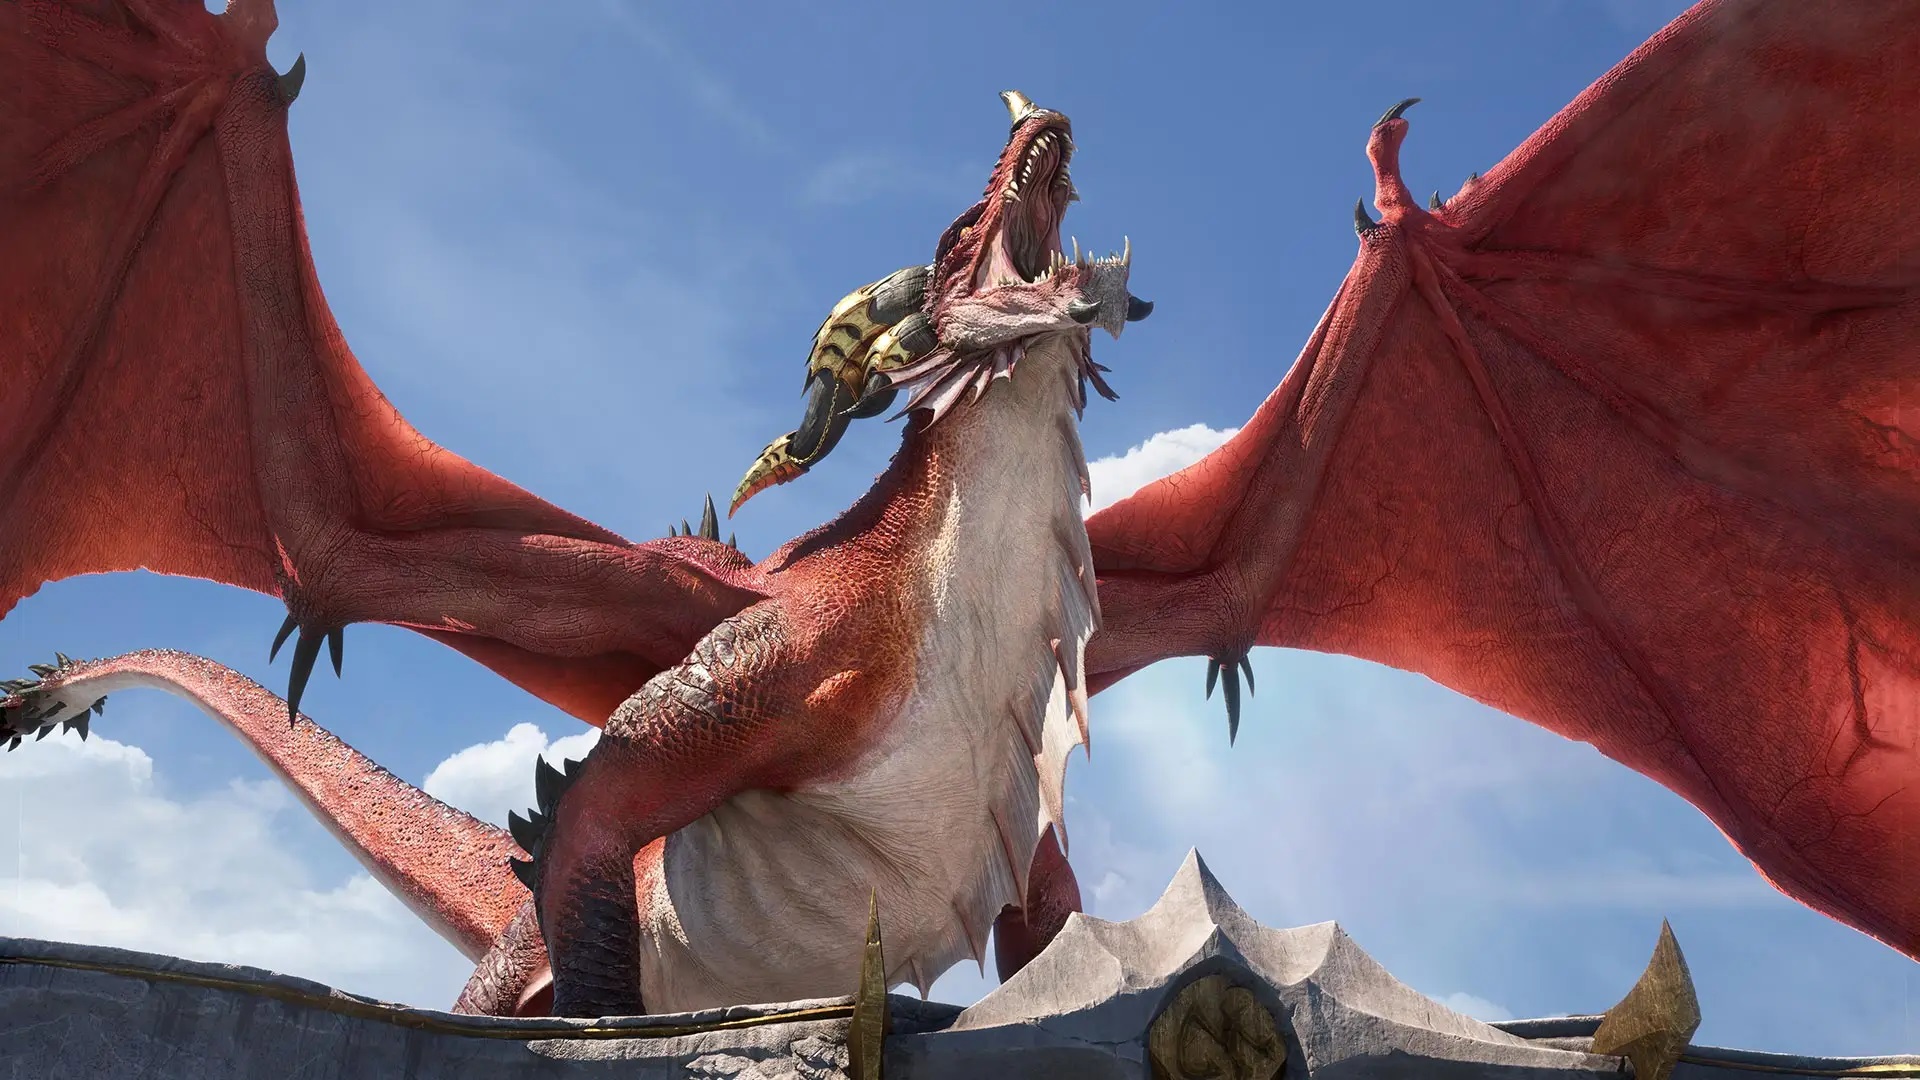 An impressive red dragon tilts its head back and roars, with wings spread against a blue sky